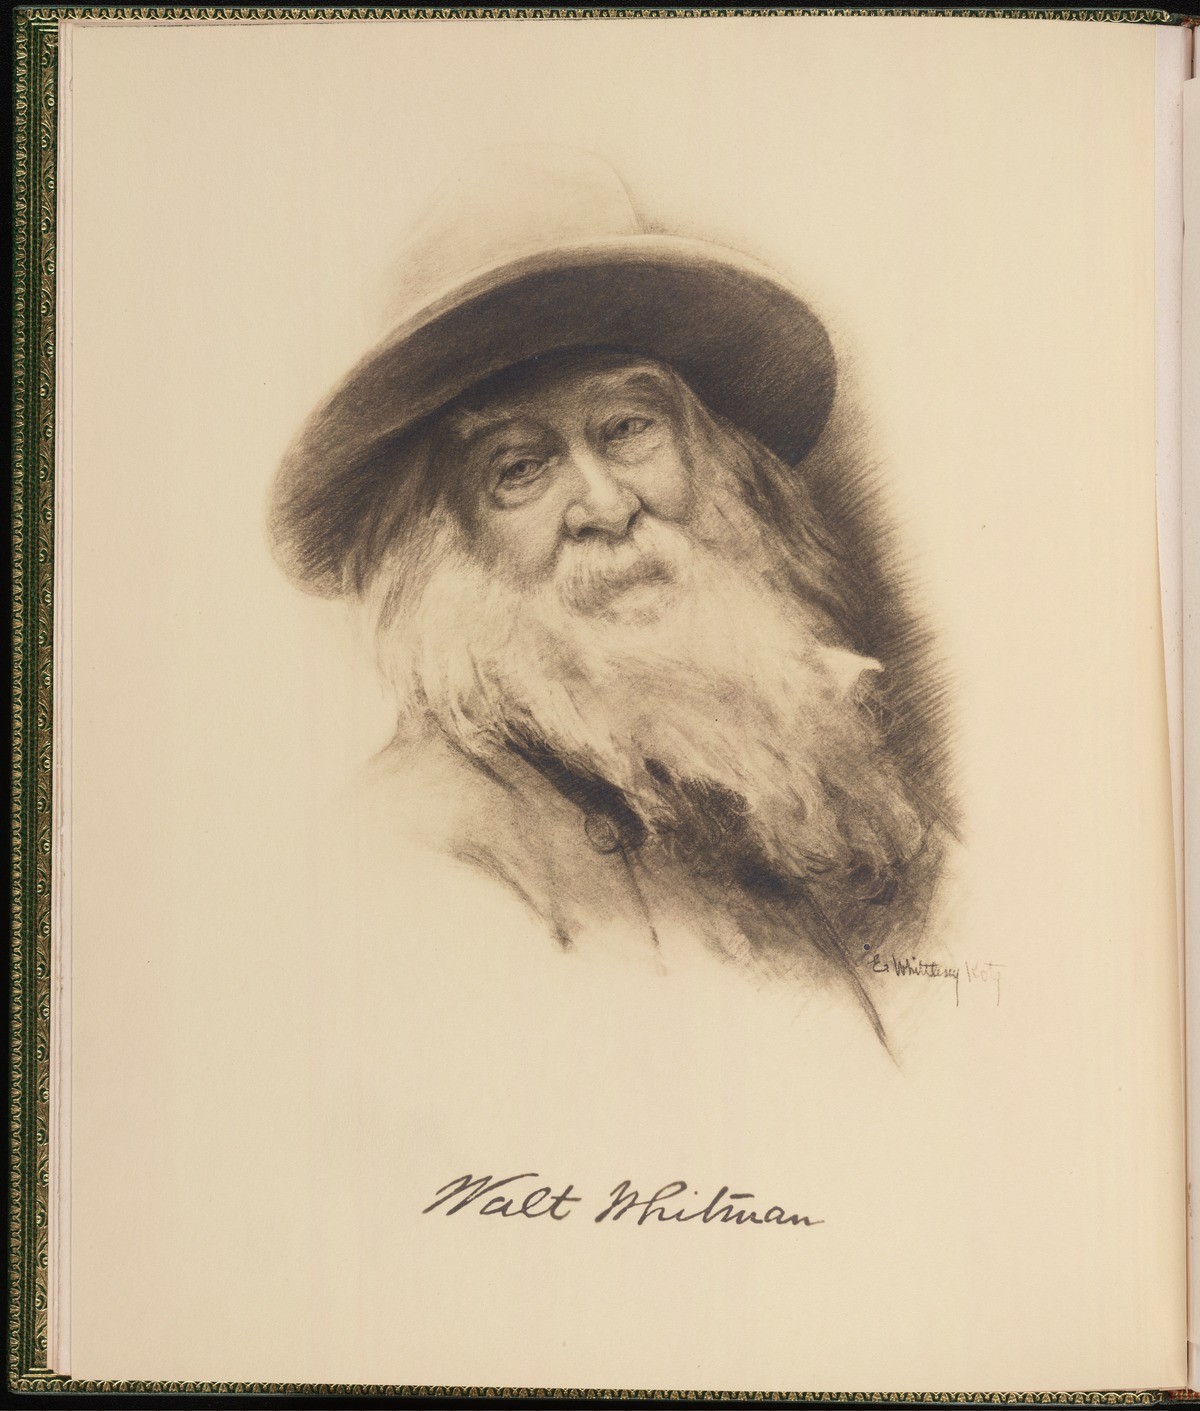 The Beinecke’s Walt Whitman Collection